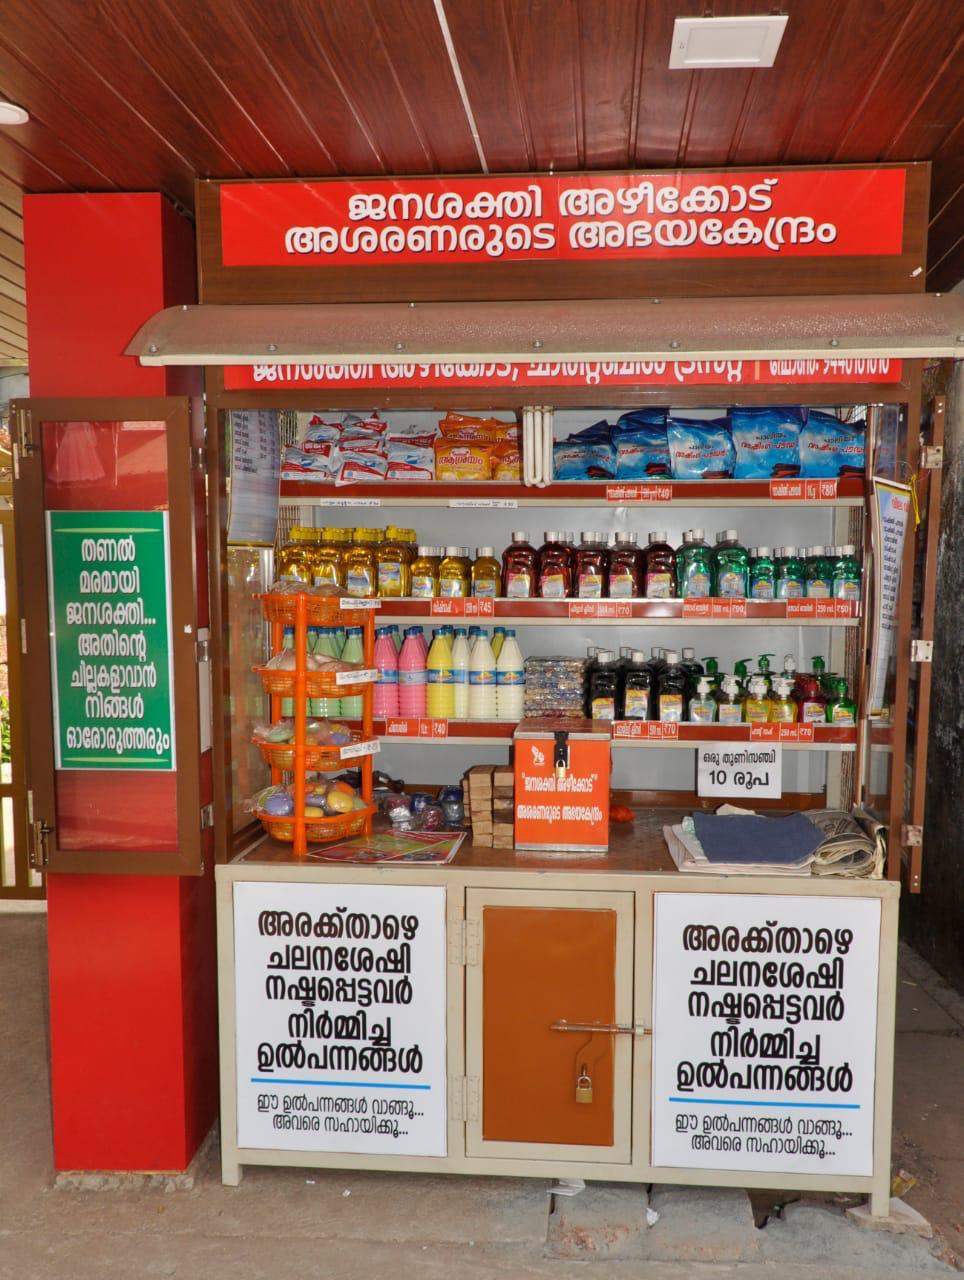 This small Indian shop has no shopkeeper, and the reason will melt your heart